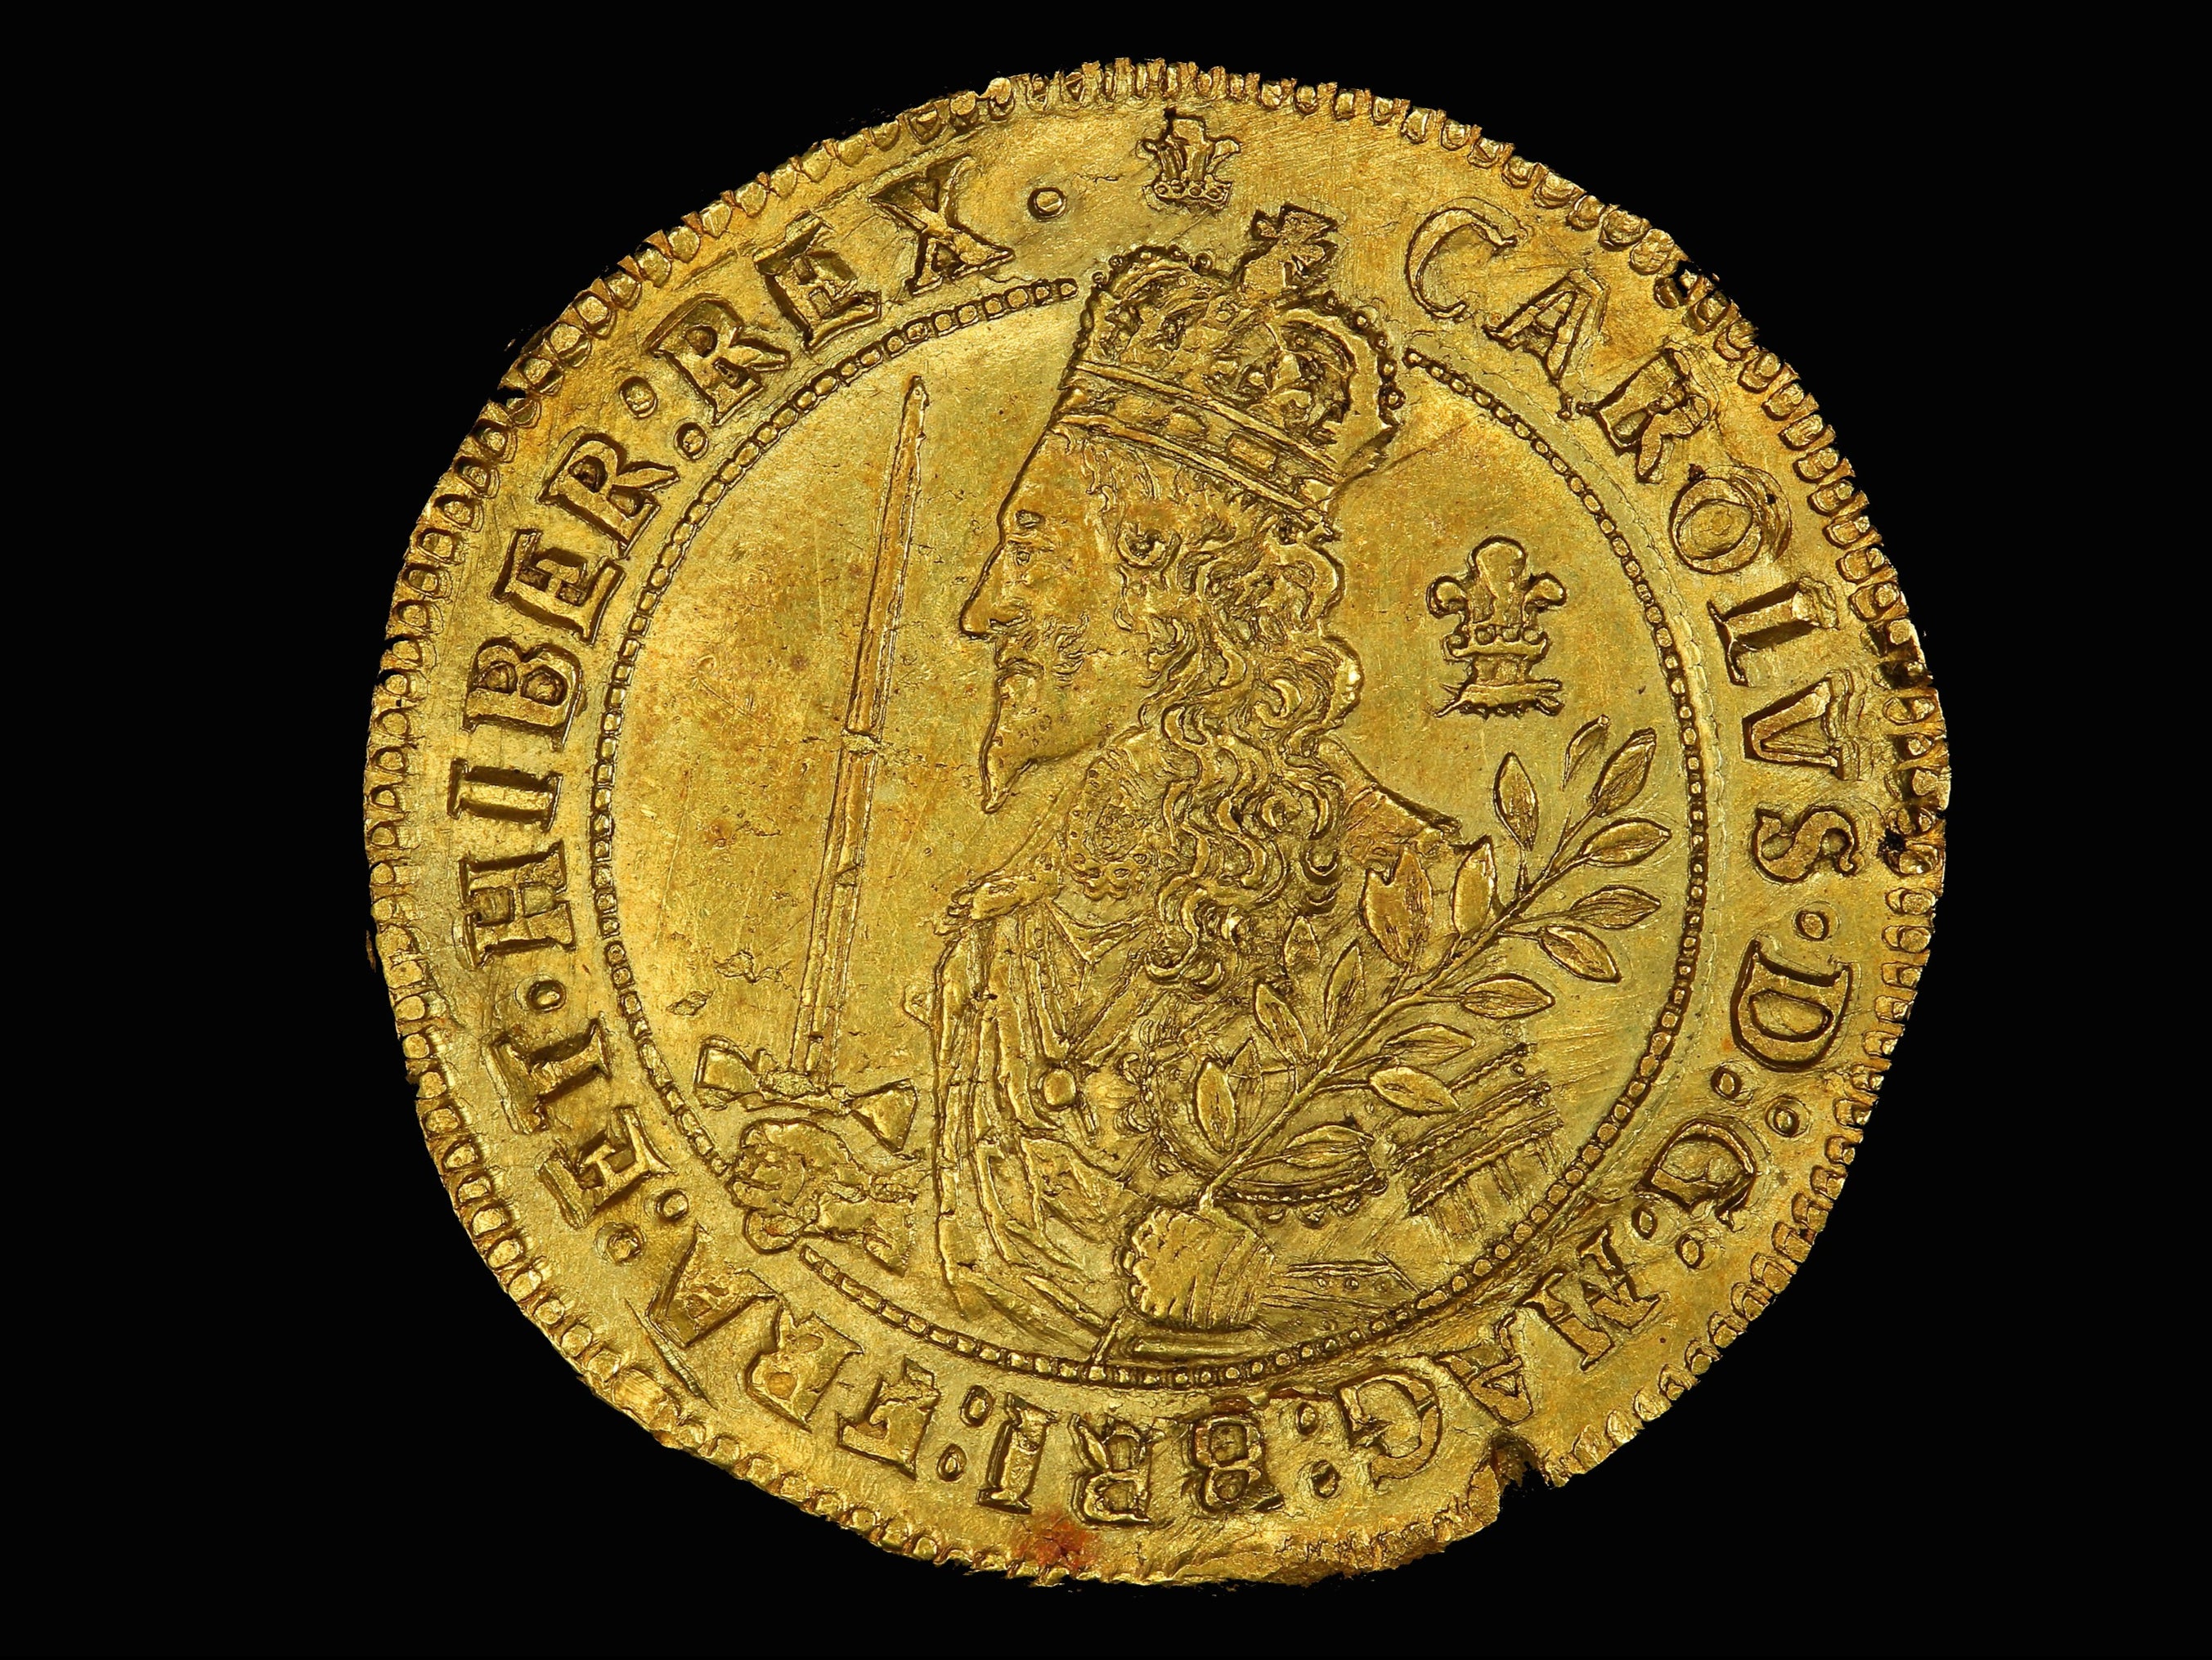 The rare and expensive Triple Unite was only minted by Charles I during his Civil War exile in Oxford